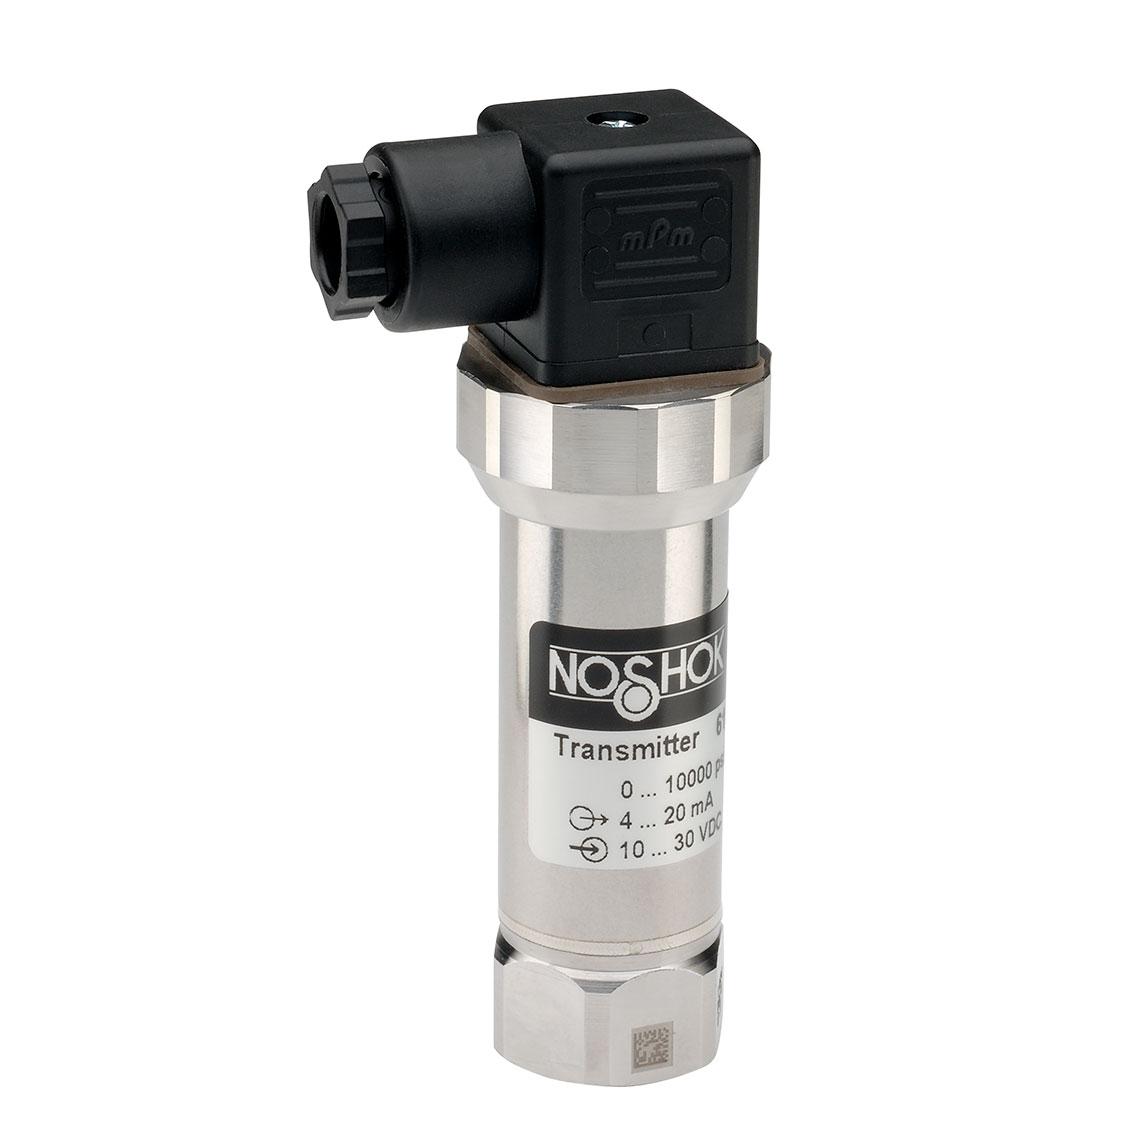 Noshok 615-20000-2-1-6-3 0 to 20,000 psig, 0.125% Accuracy (Best Fit Straight Line (BFSL)), 4 to 20 mA Output, 9/16-18 Female High Pressure Transducer with 6-pin Bayonet Electrical Connection